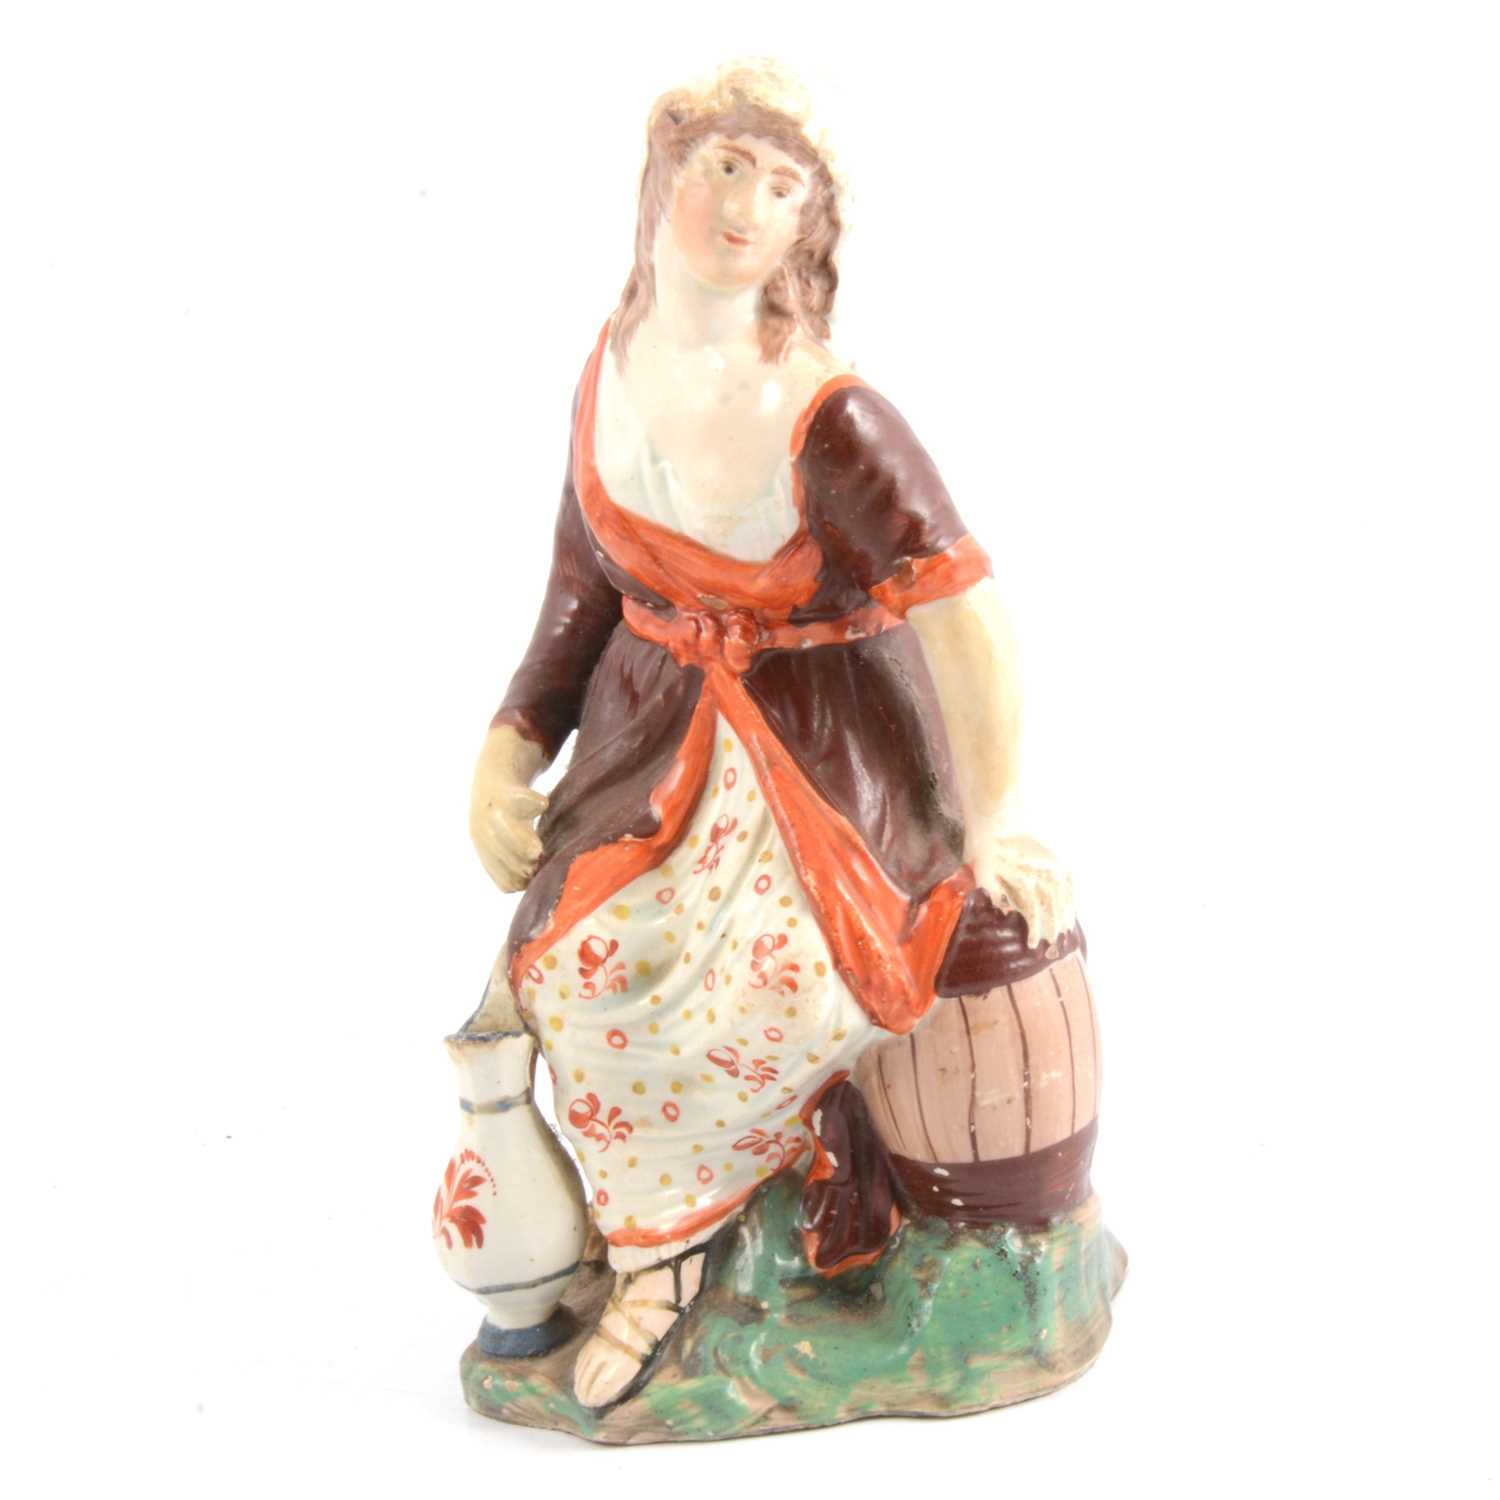 Lot 52 - Early Staffordshire pearlware figure, Washer Woman